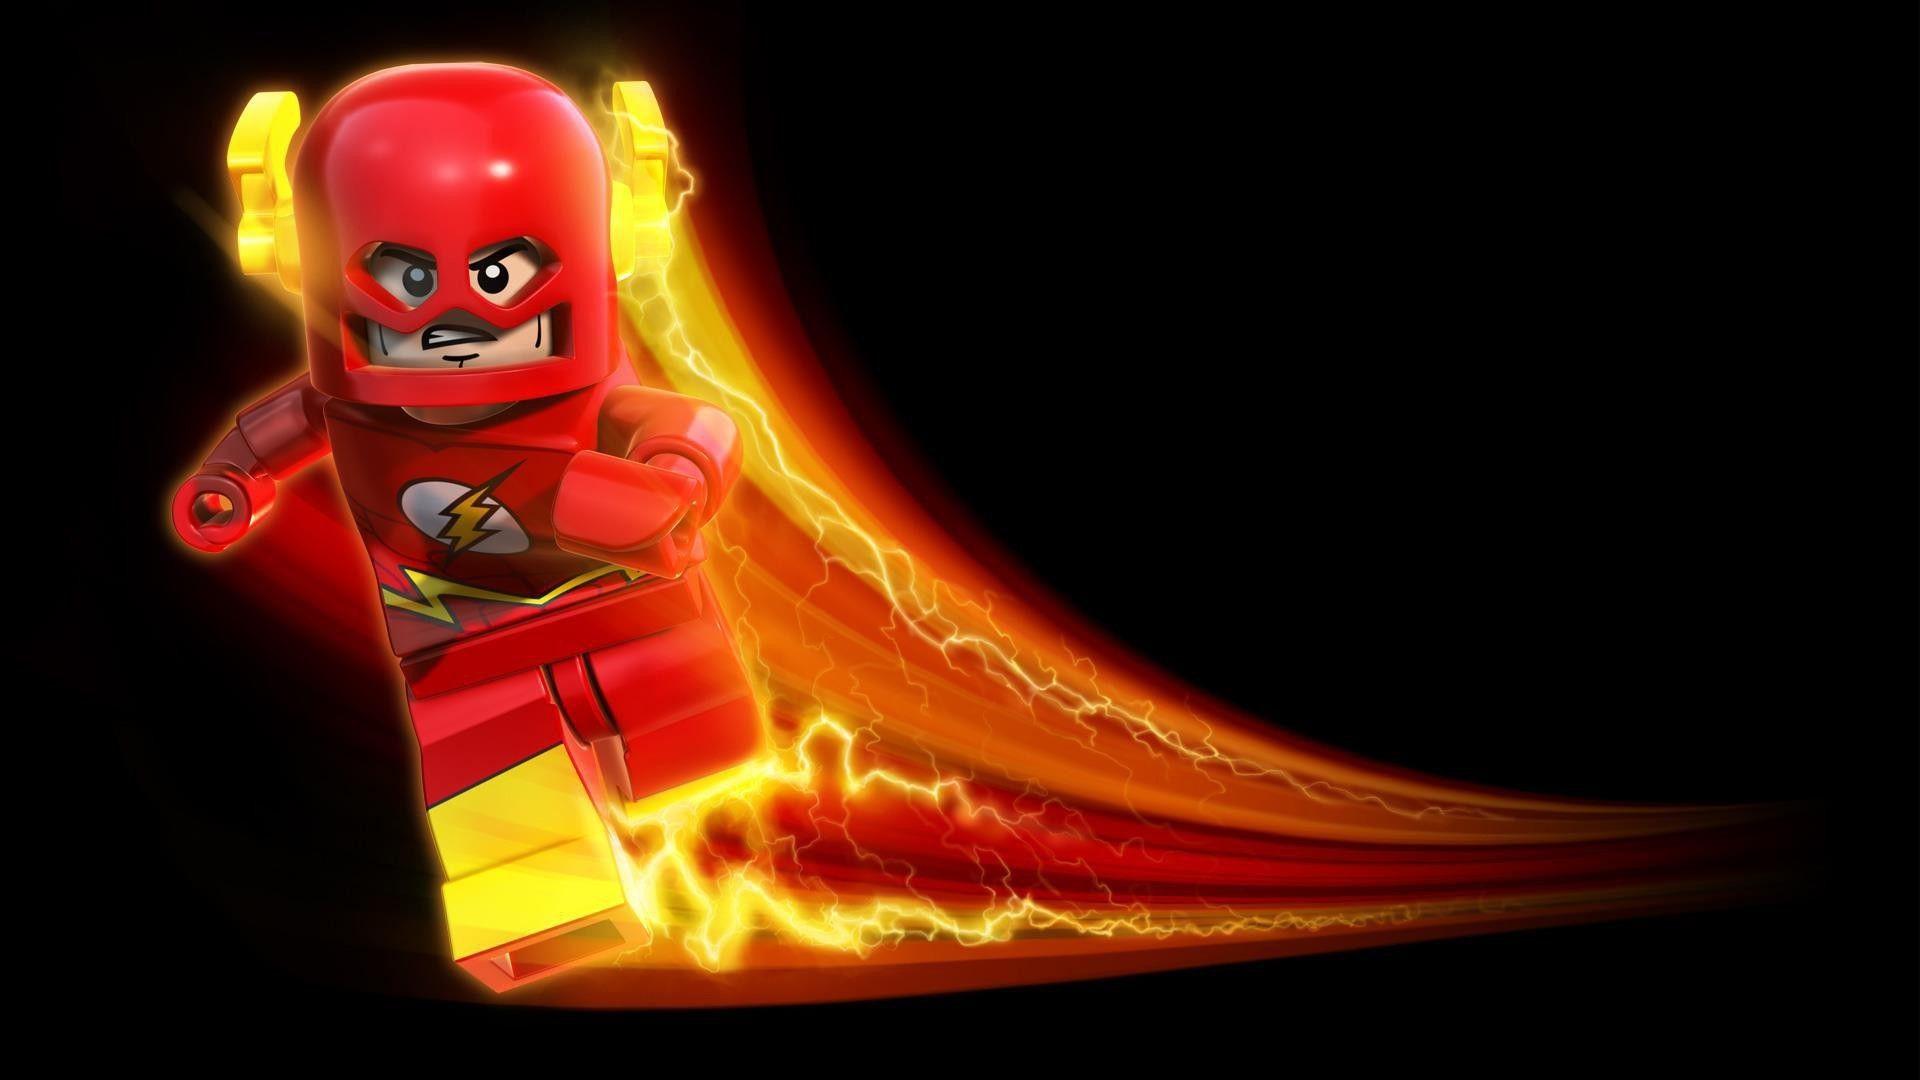 The Flash Wallpaper background picture